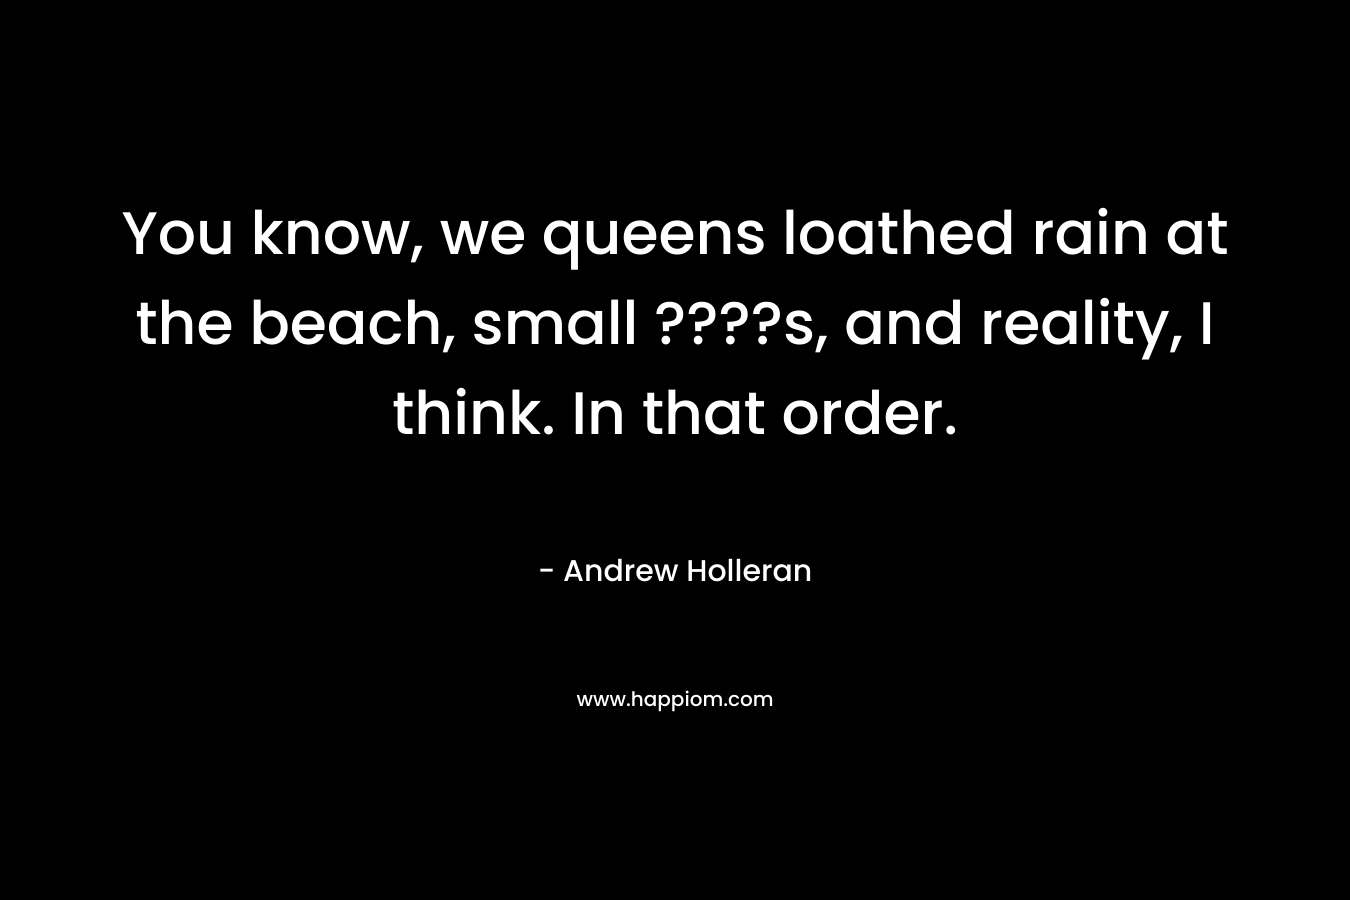 You know, we queens loathed rain at the beach, small ????s, and reality, I think. In that order. – Andrew Holleran